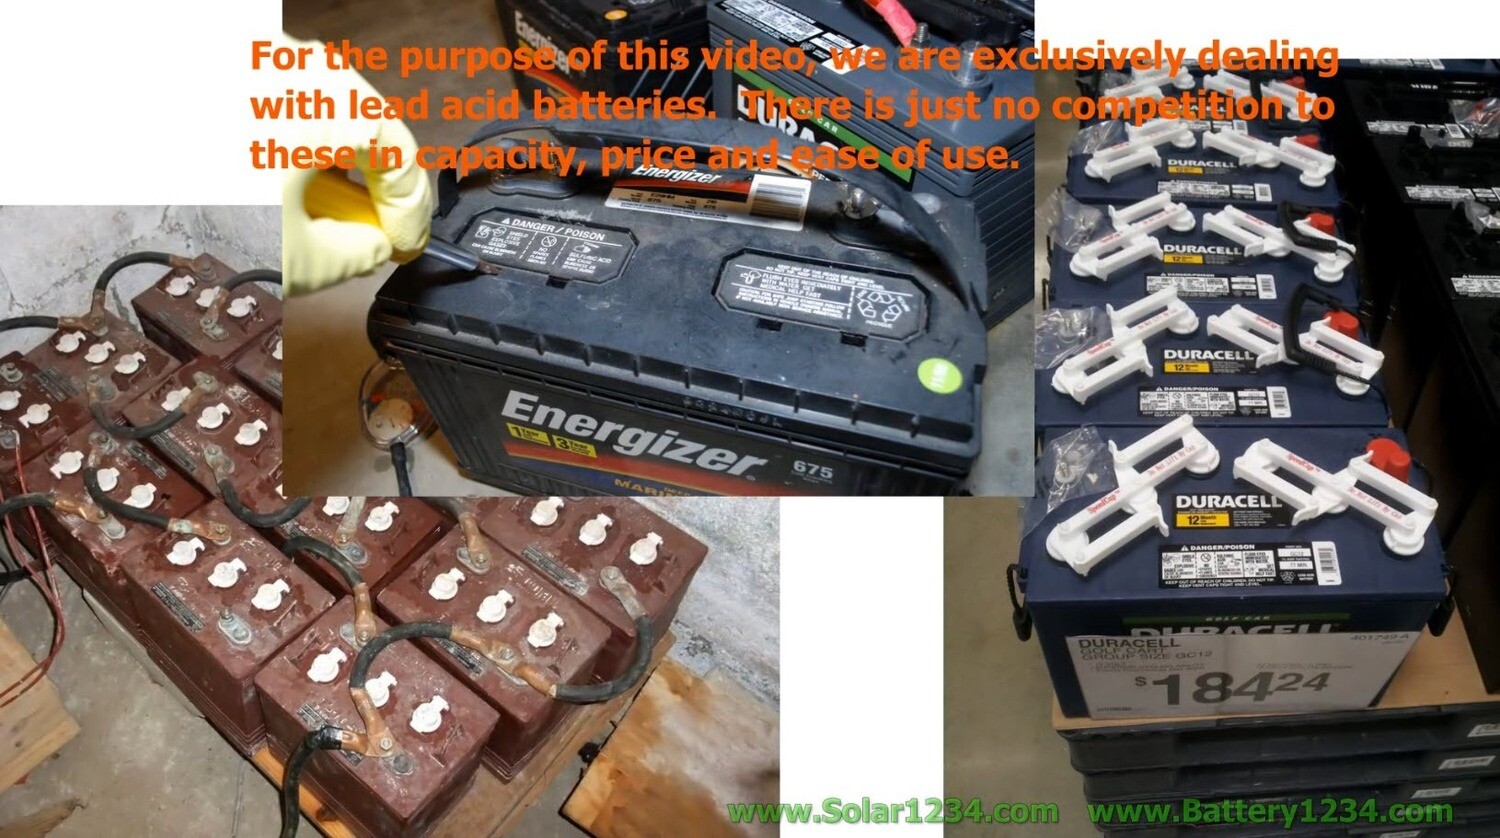 POWER VIDEOS: PACK #2 Original Home and Mobile Battery Bank Videos 4.5 Hours Total  This is the ORIGINAL VIDEOS